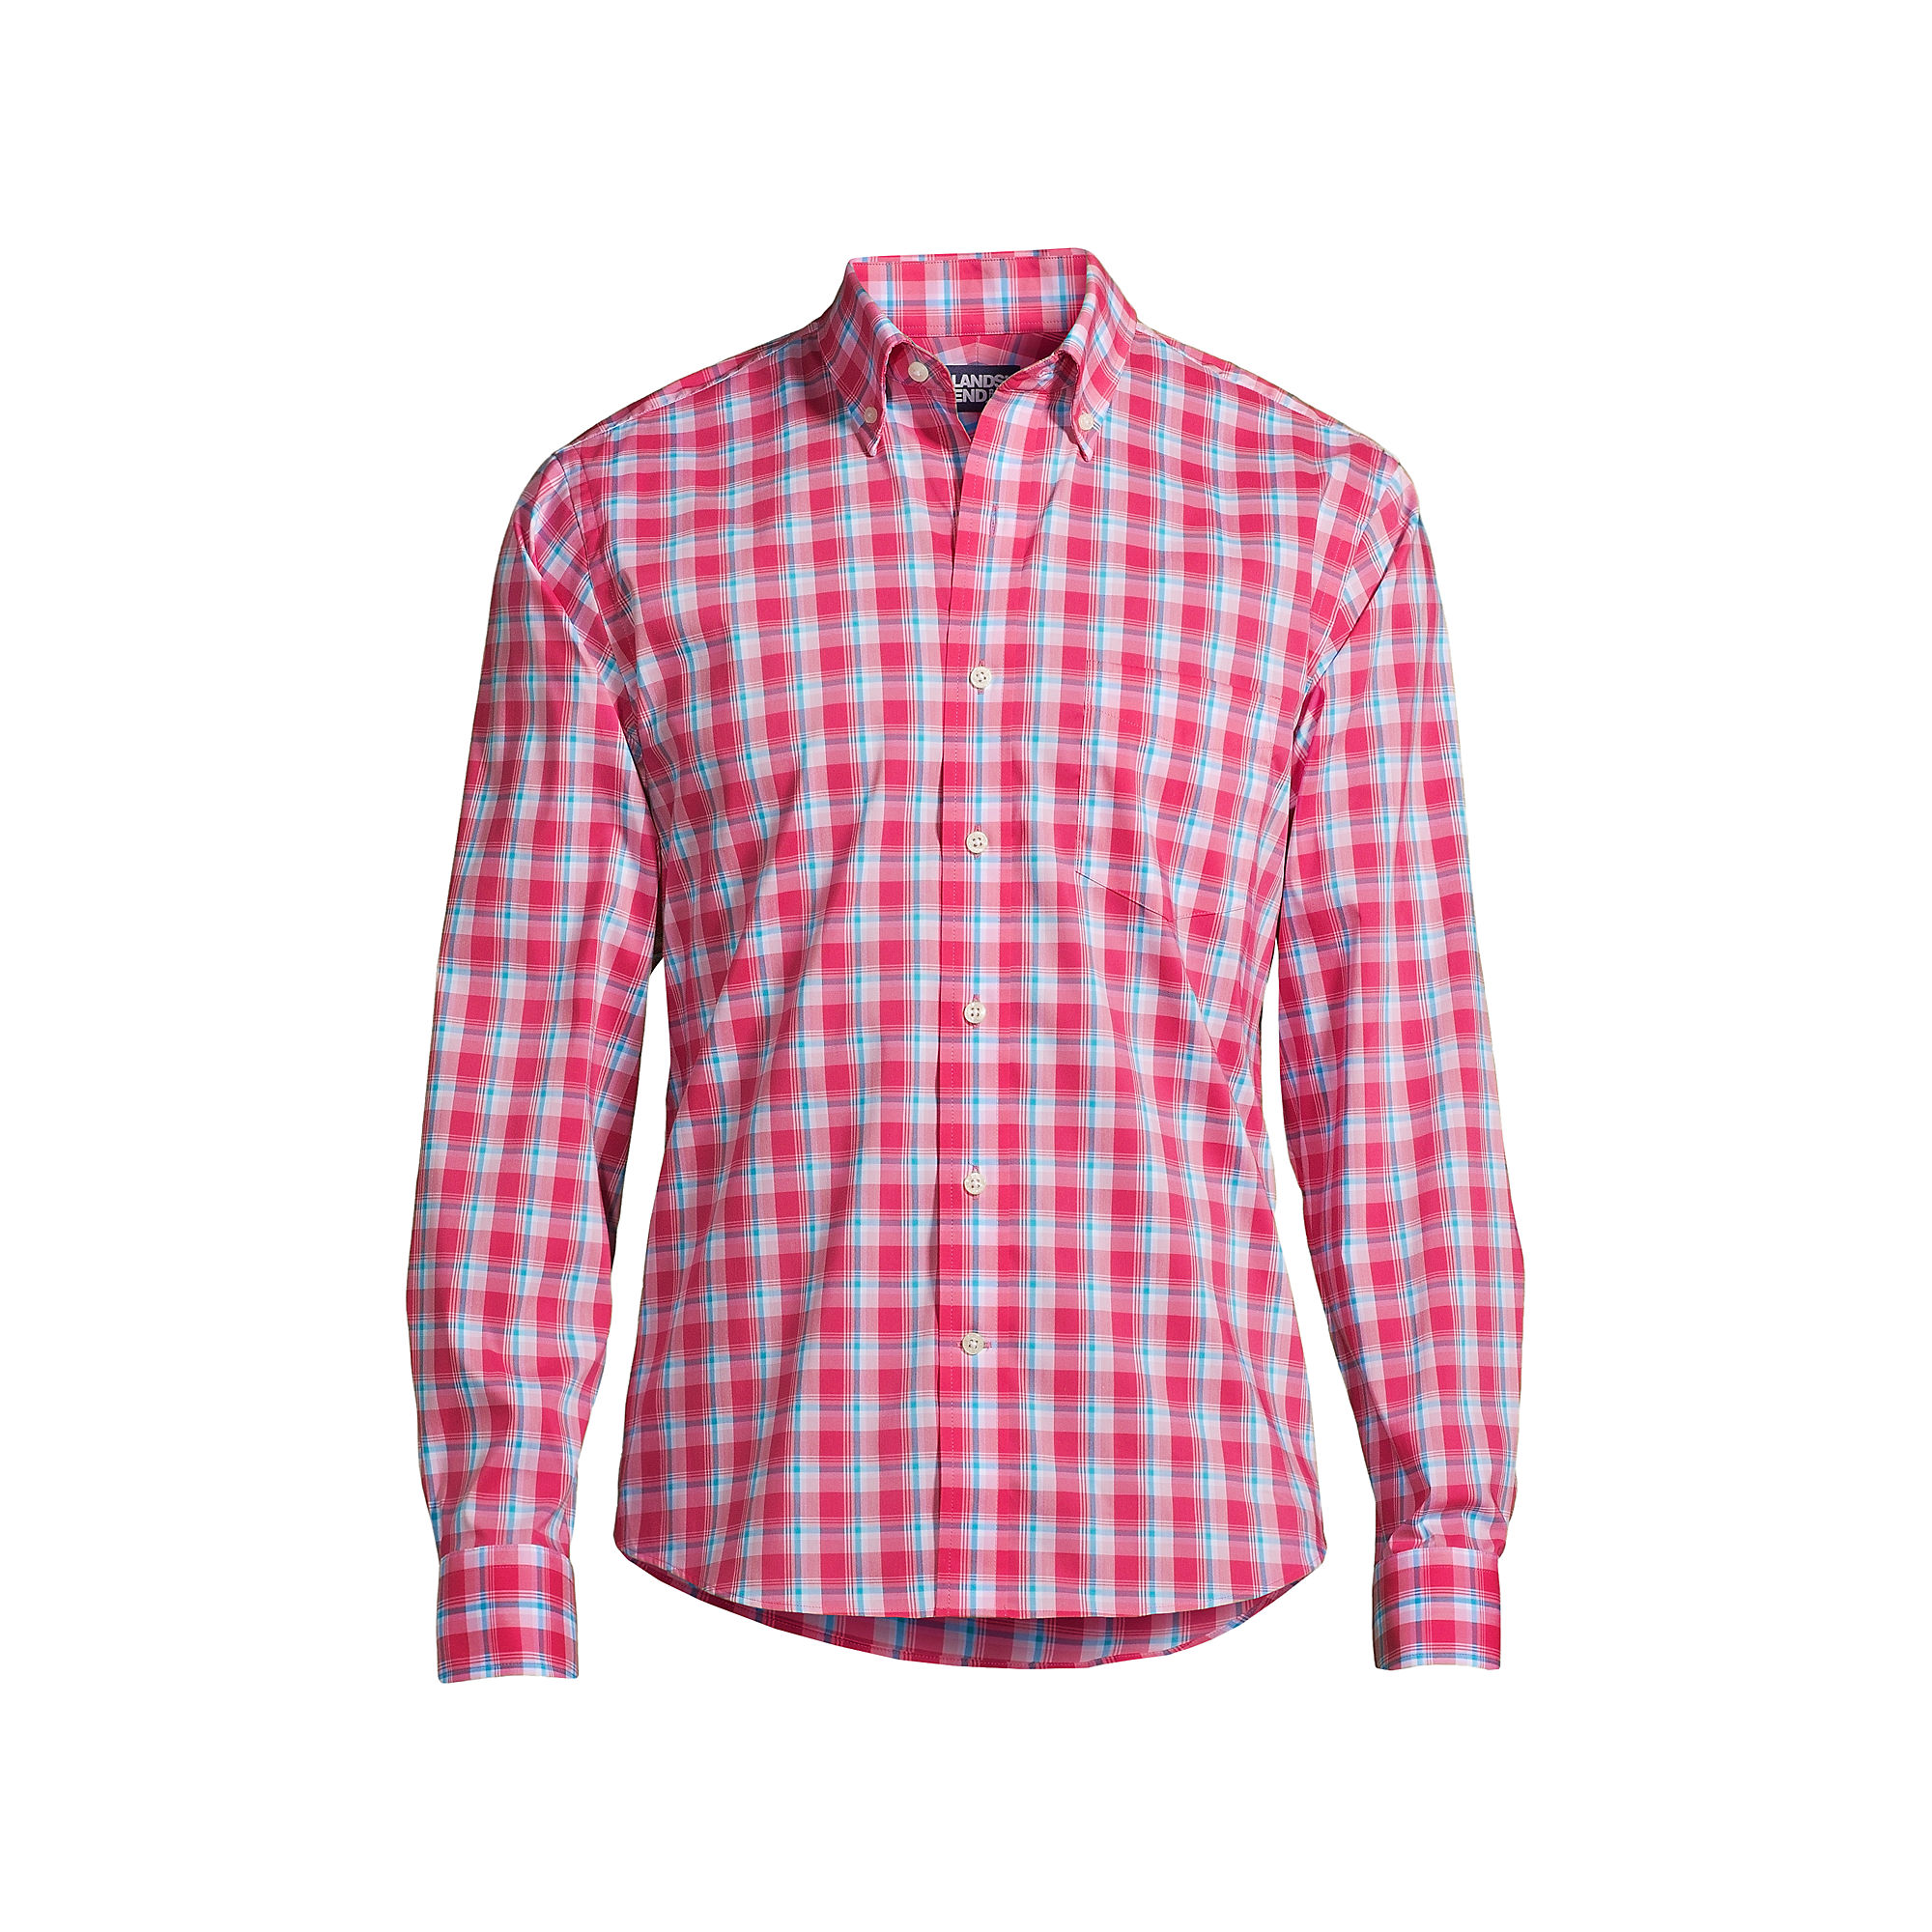 Lands End Men's Traditional Fit Comfort-First Shirt with CoolMax (Hot Pink Plaid in sizes M, L, XL, XXL)